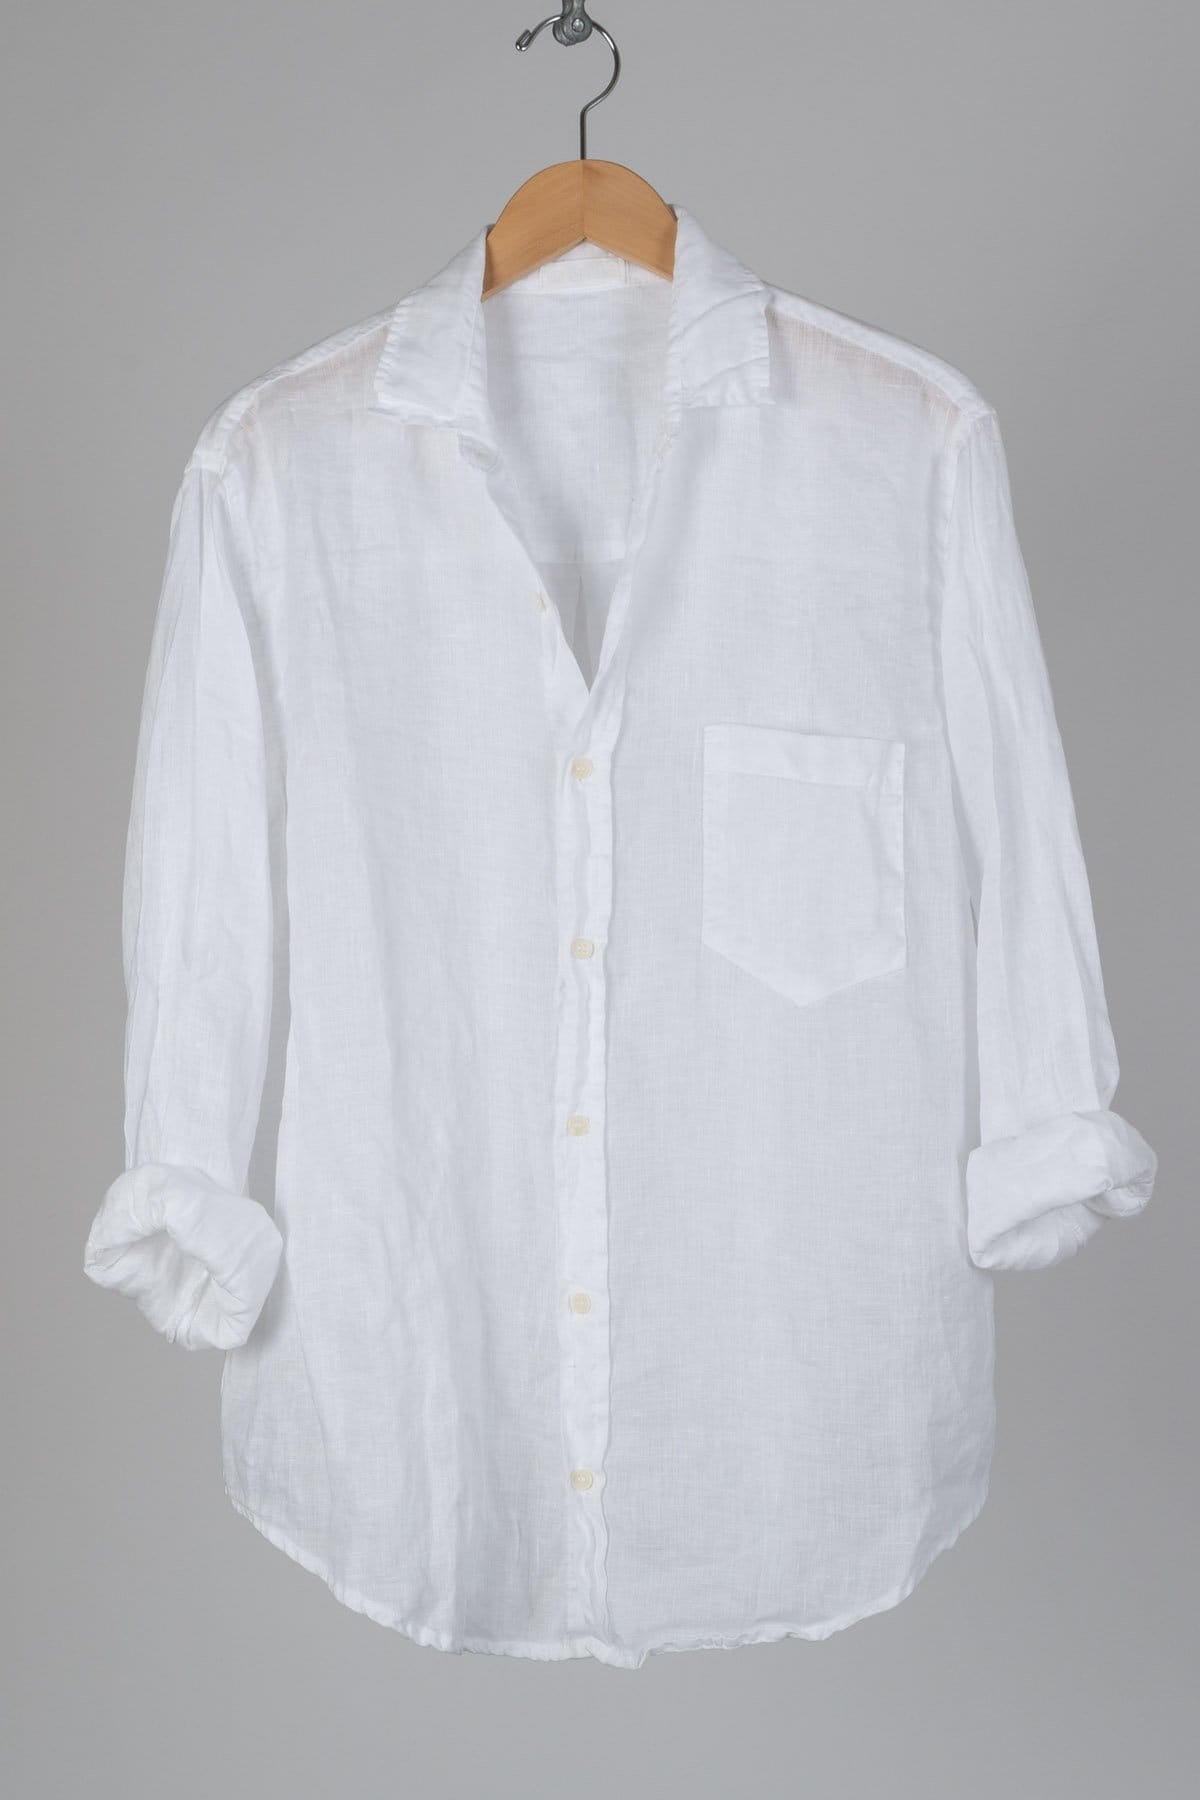 white linen button down with pocket on chest